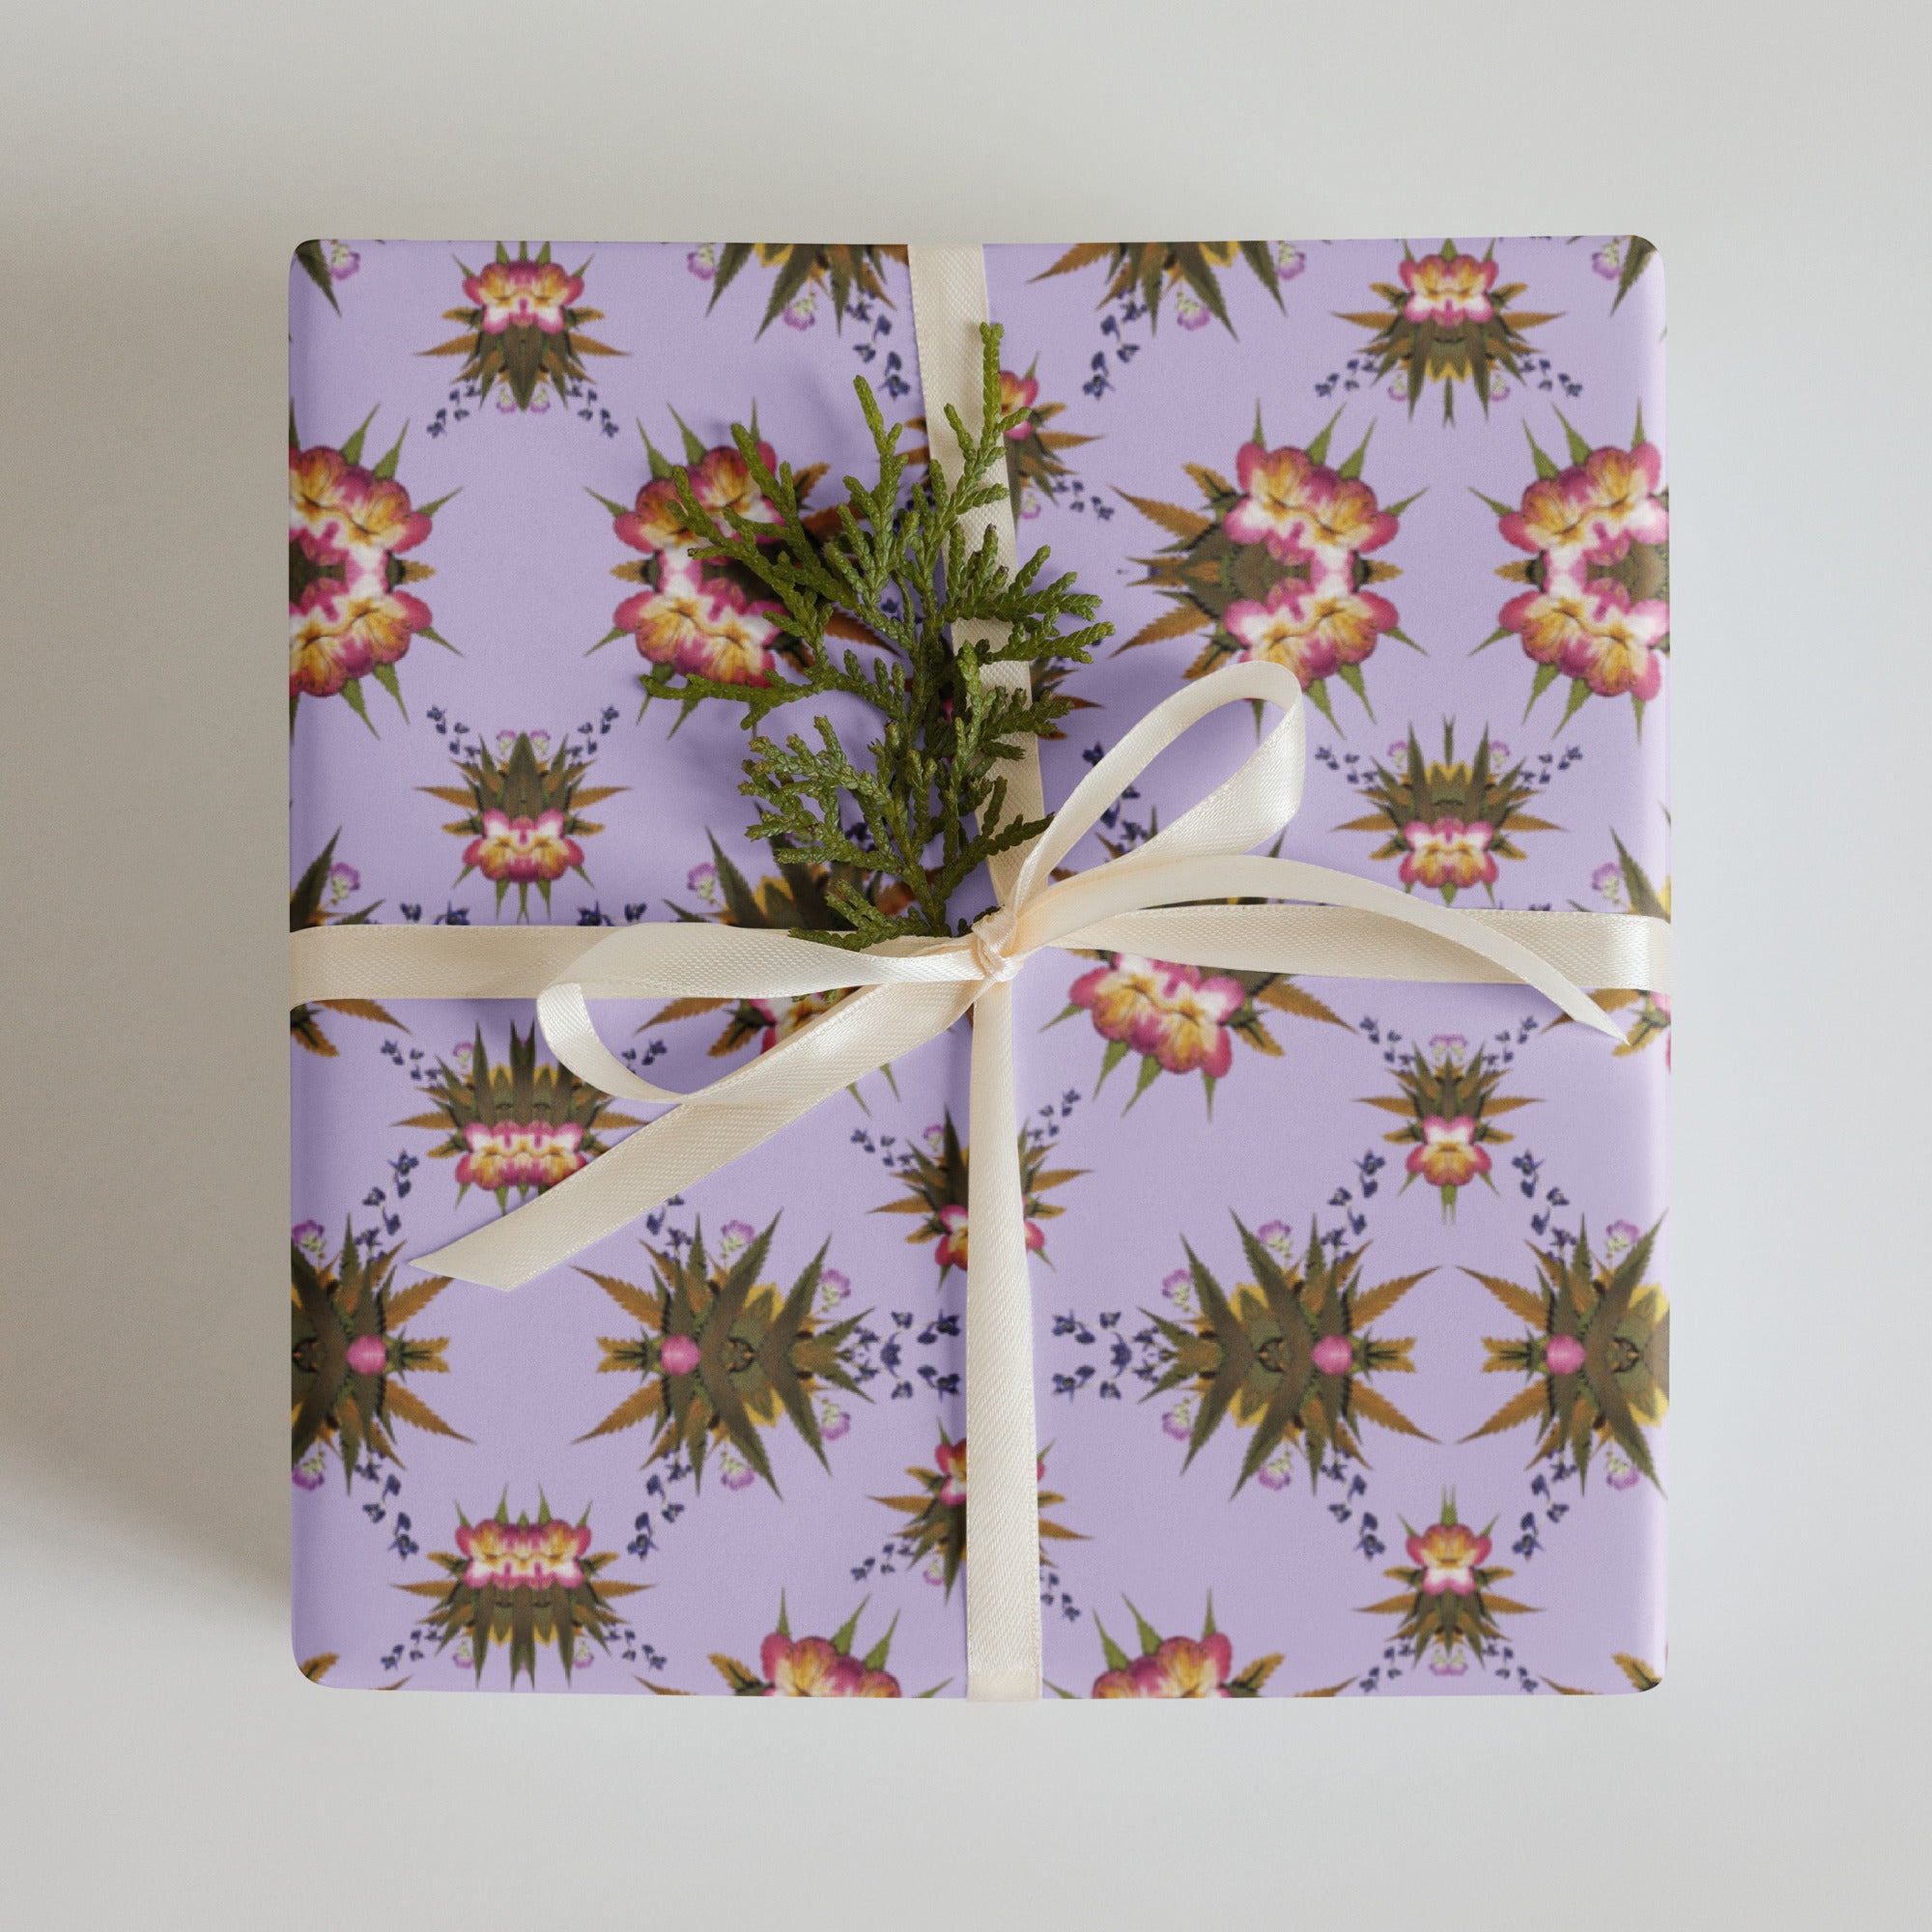 Smoochie Boochie (Purps) Wrapping paper sheets